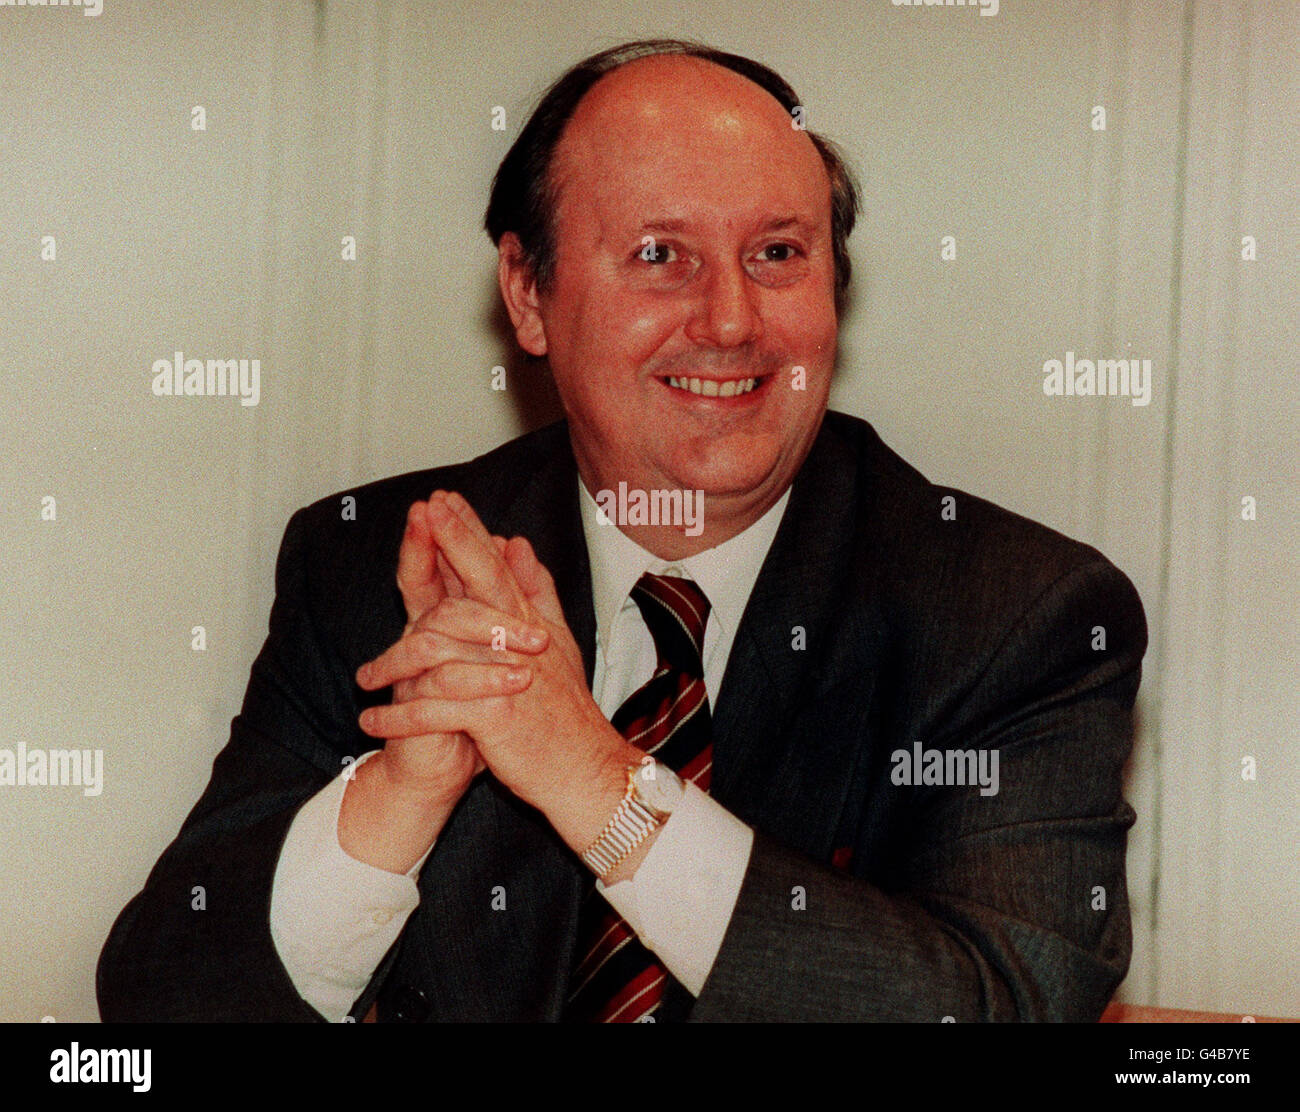 PA NEWS PHOTO 30/1/97  SIR KENNETH CALMAN CHIEF MEDICAL OFFICER WHERE IT WAS ANNOUNCED THAT HE HAD BEEN APPOINTED TO ADVISE THE NEWLY-CREATED FOOD SAFETY COUNCIL, WHICH WILL BE SET UP TO DEAL WITH THE HANDLING OF FOOD SAFETY MATTERS IN LONDON Stock Photo